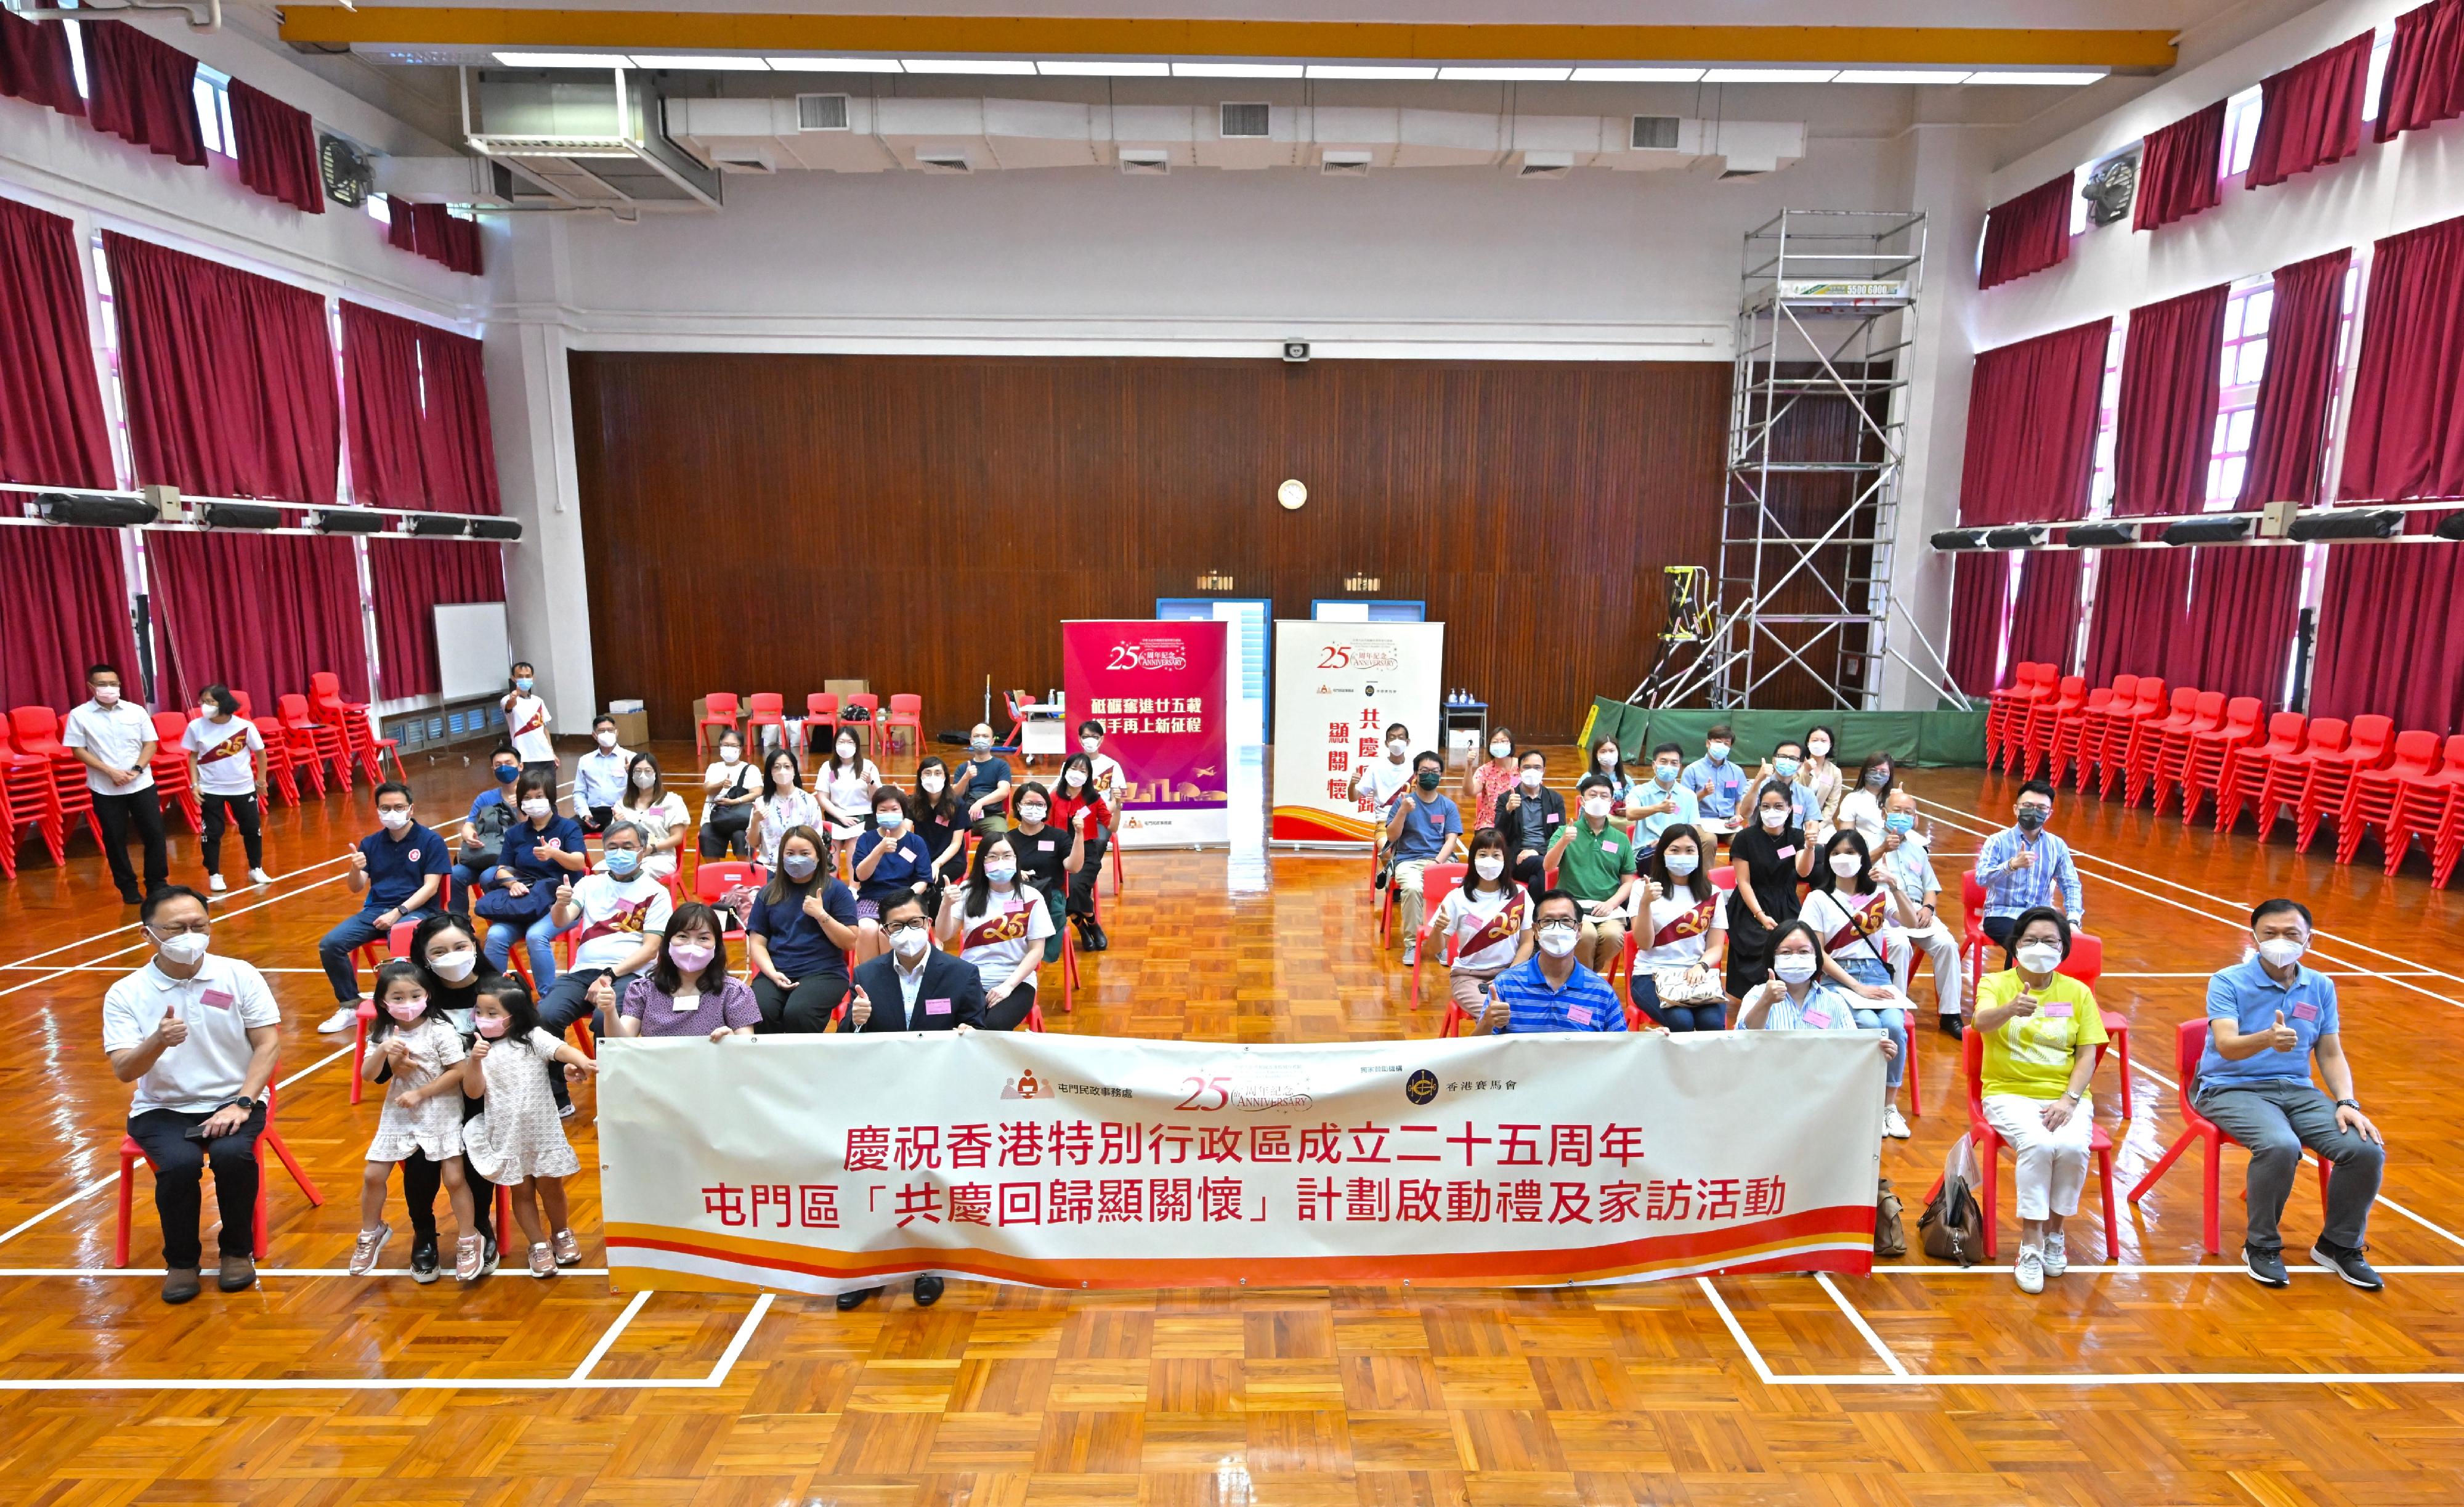 The Secretary for Security, Mr Tang Ping-keung, today (June 19) paid home visits under the Celebrations for All project in Tuen Mun District to show his care and concern for the grass-roots families, and distributed gift packs in celebration of the 25th anniversary of the establishment of the Hong Kong Special Administrative Region. Photo shows Mr Tang (front row, fifth right) posing for a photo with various non-governmental organisations and local organisations in the district before the home visits.